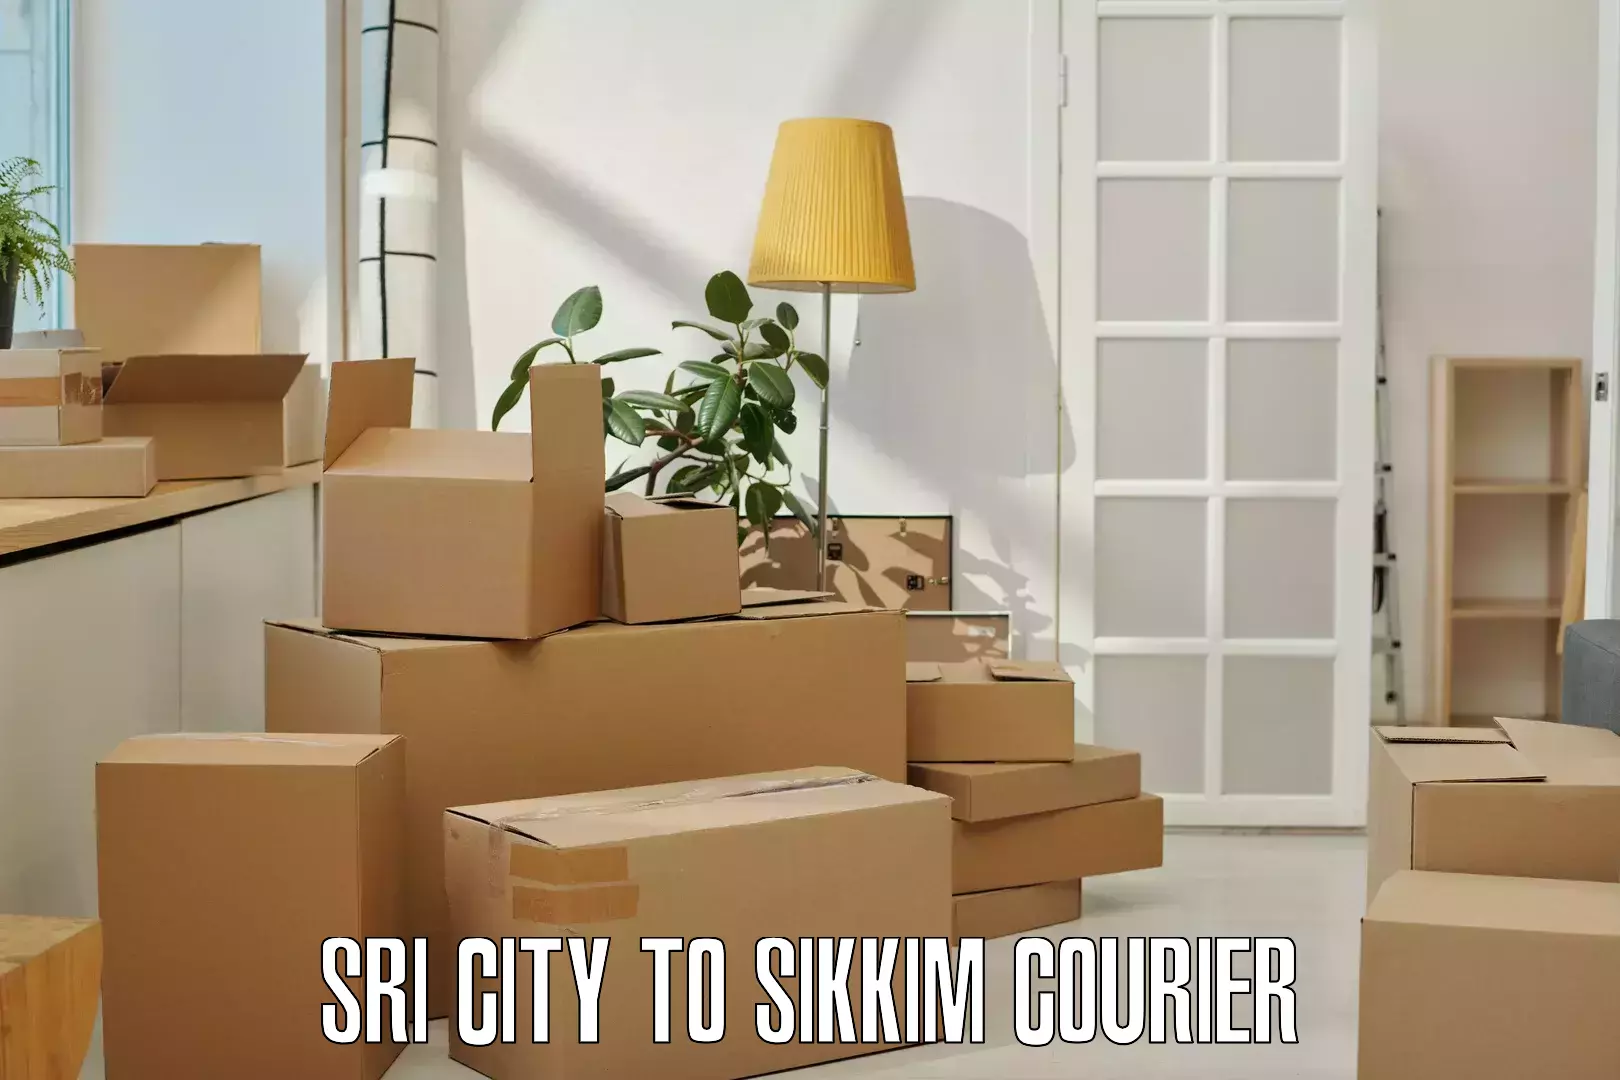 24-hour courier service Sri City to Sikkim